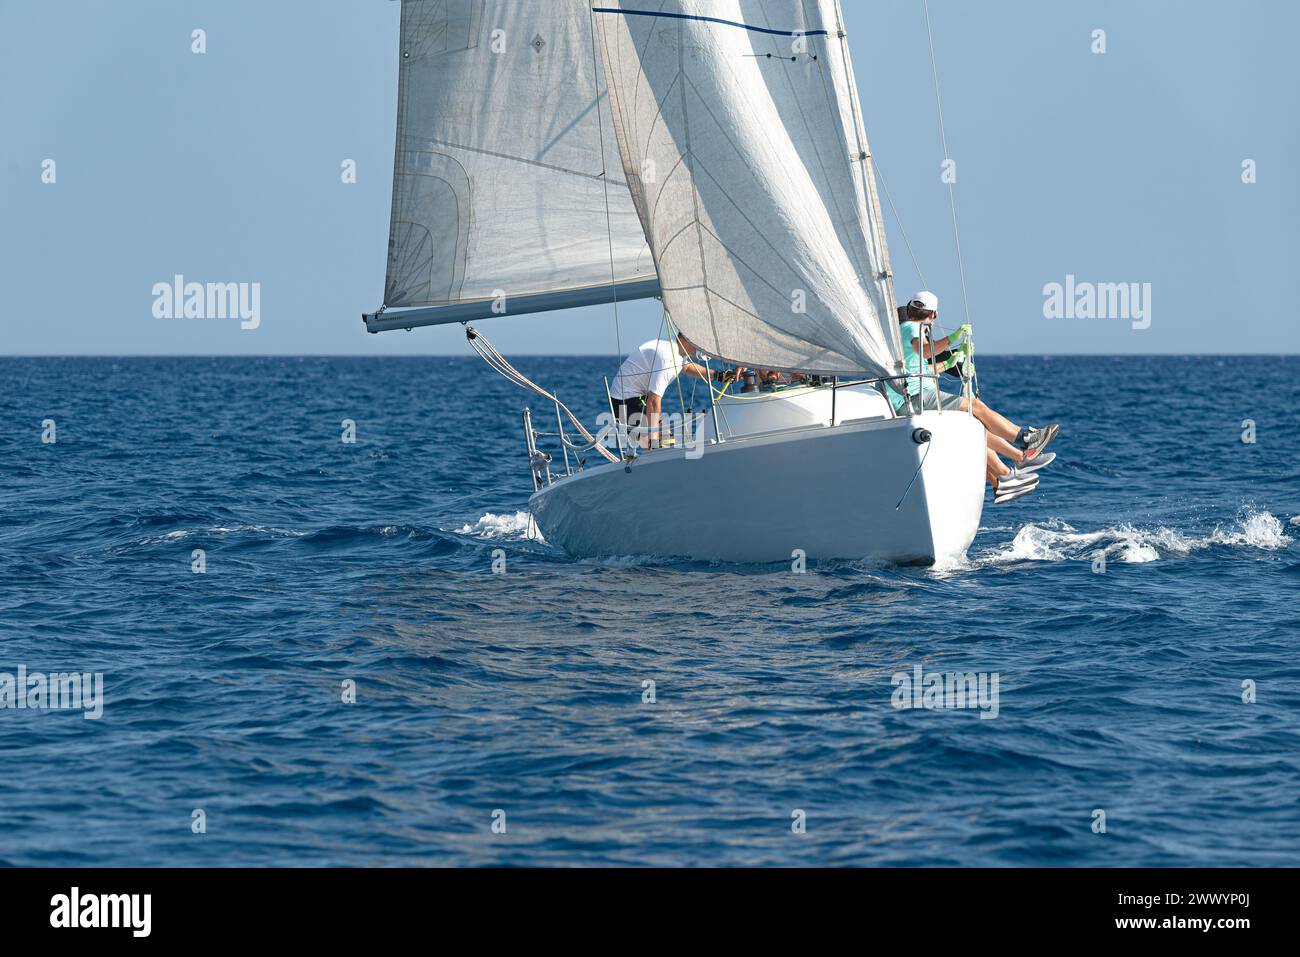 Crew navigates a sailboat on the blue ocean under clear skies Stock Photo